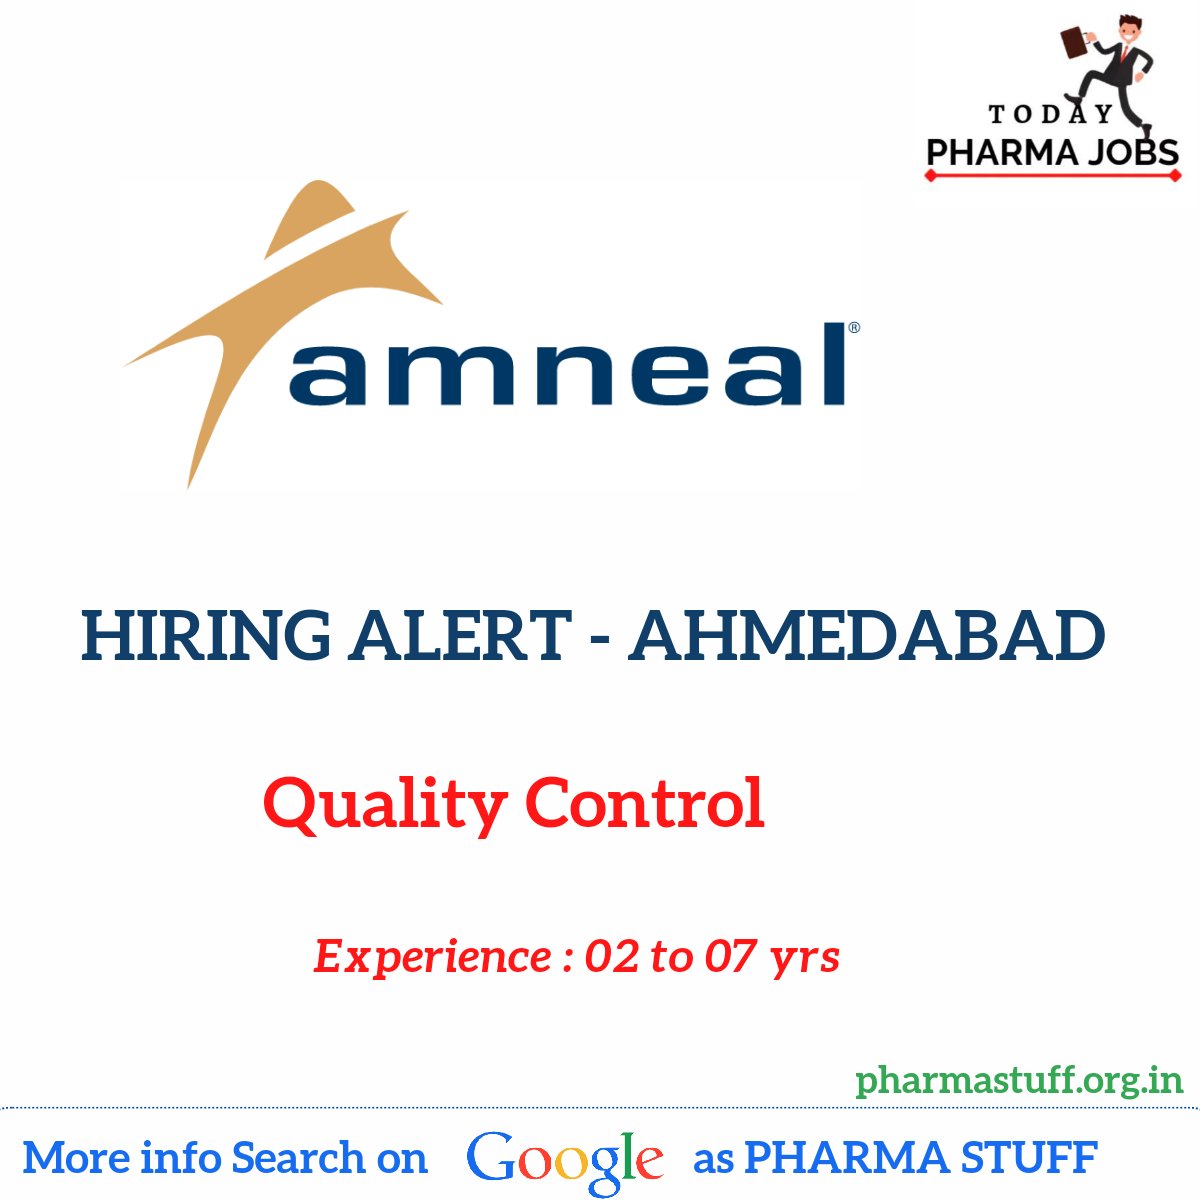 %titl amneal pharmaceuticals vacancy in quality control qc5508806808851688264